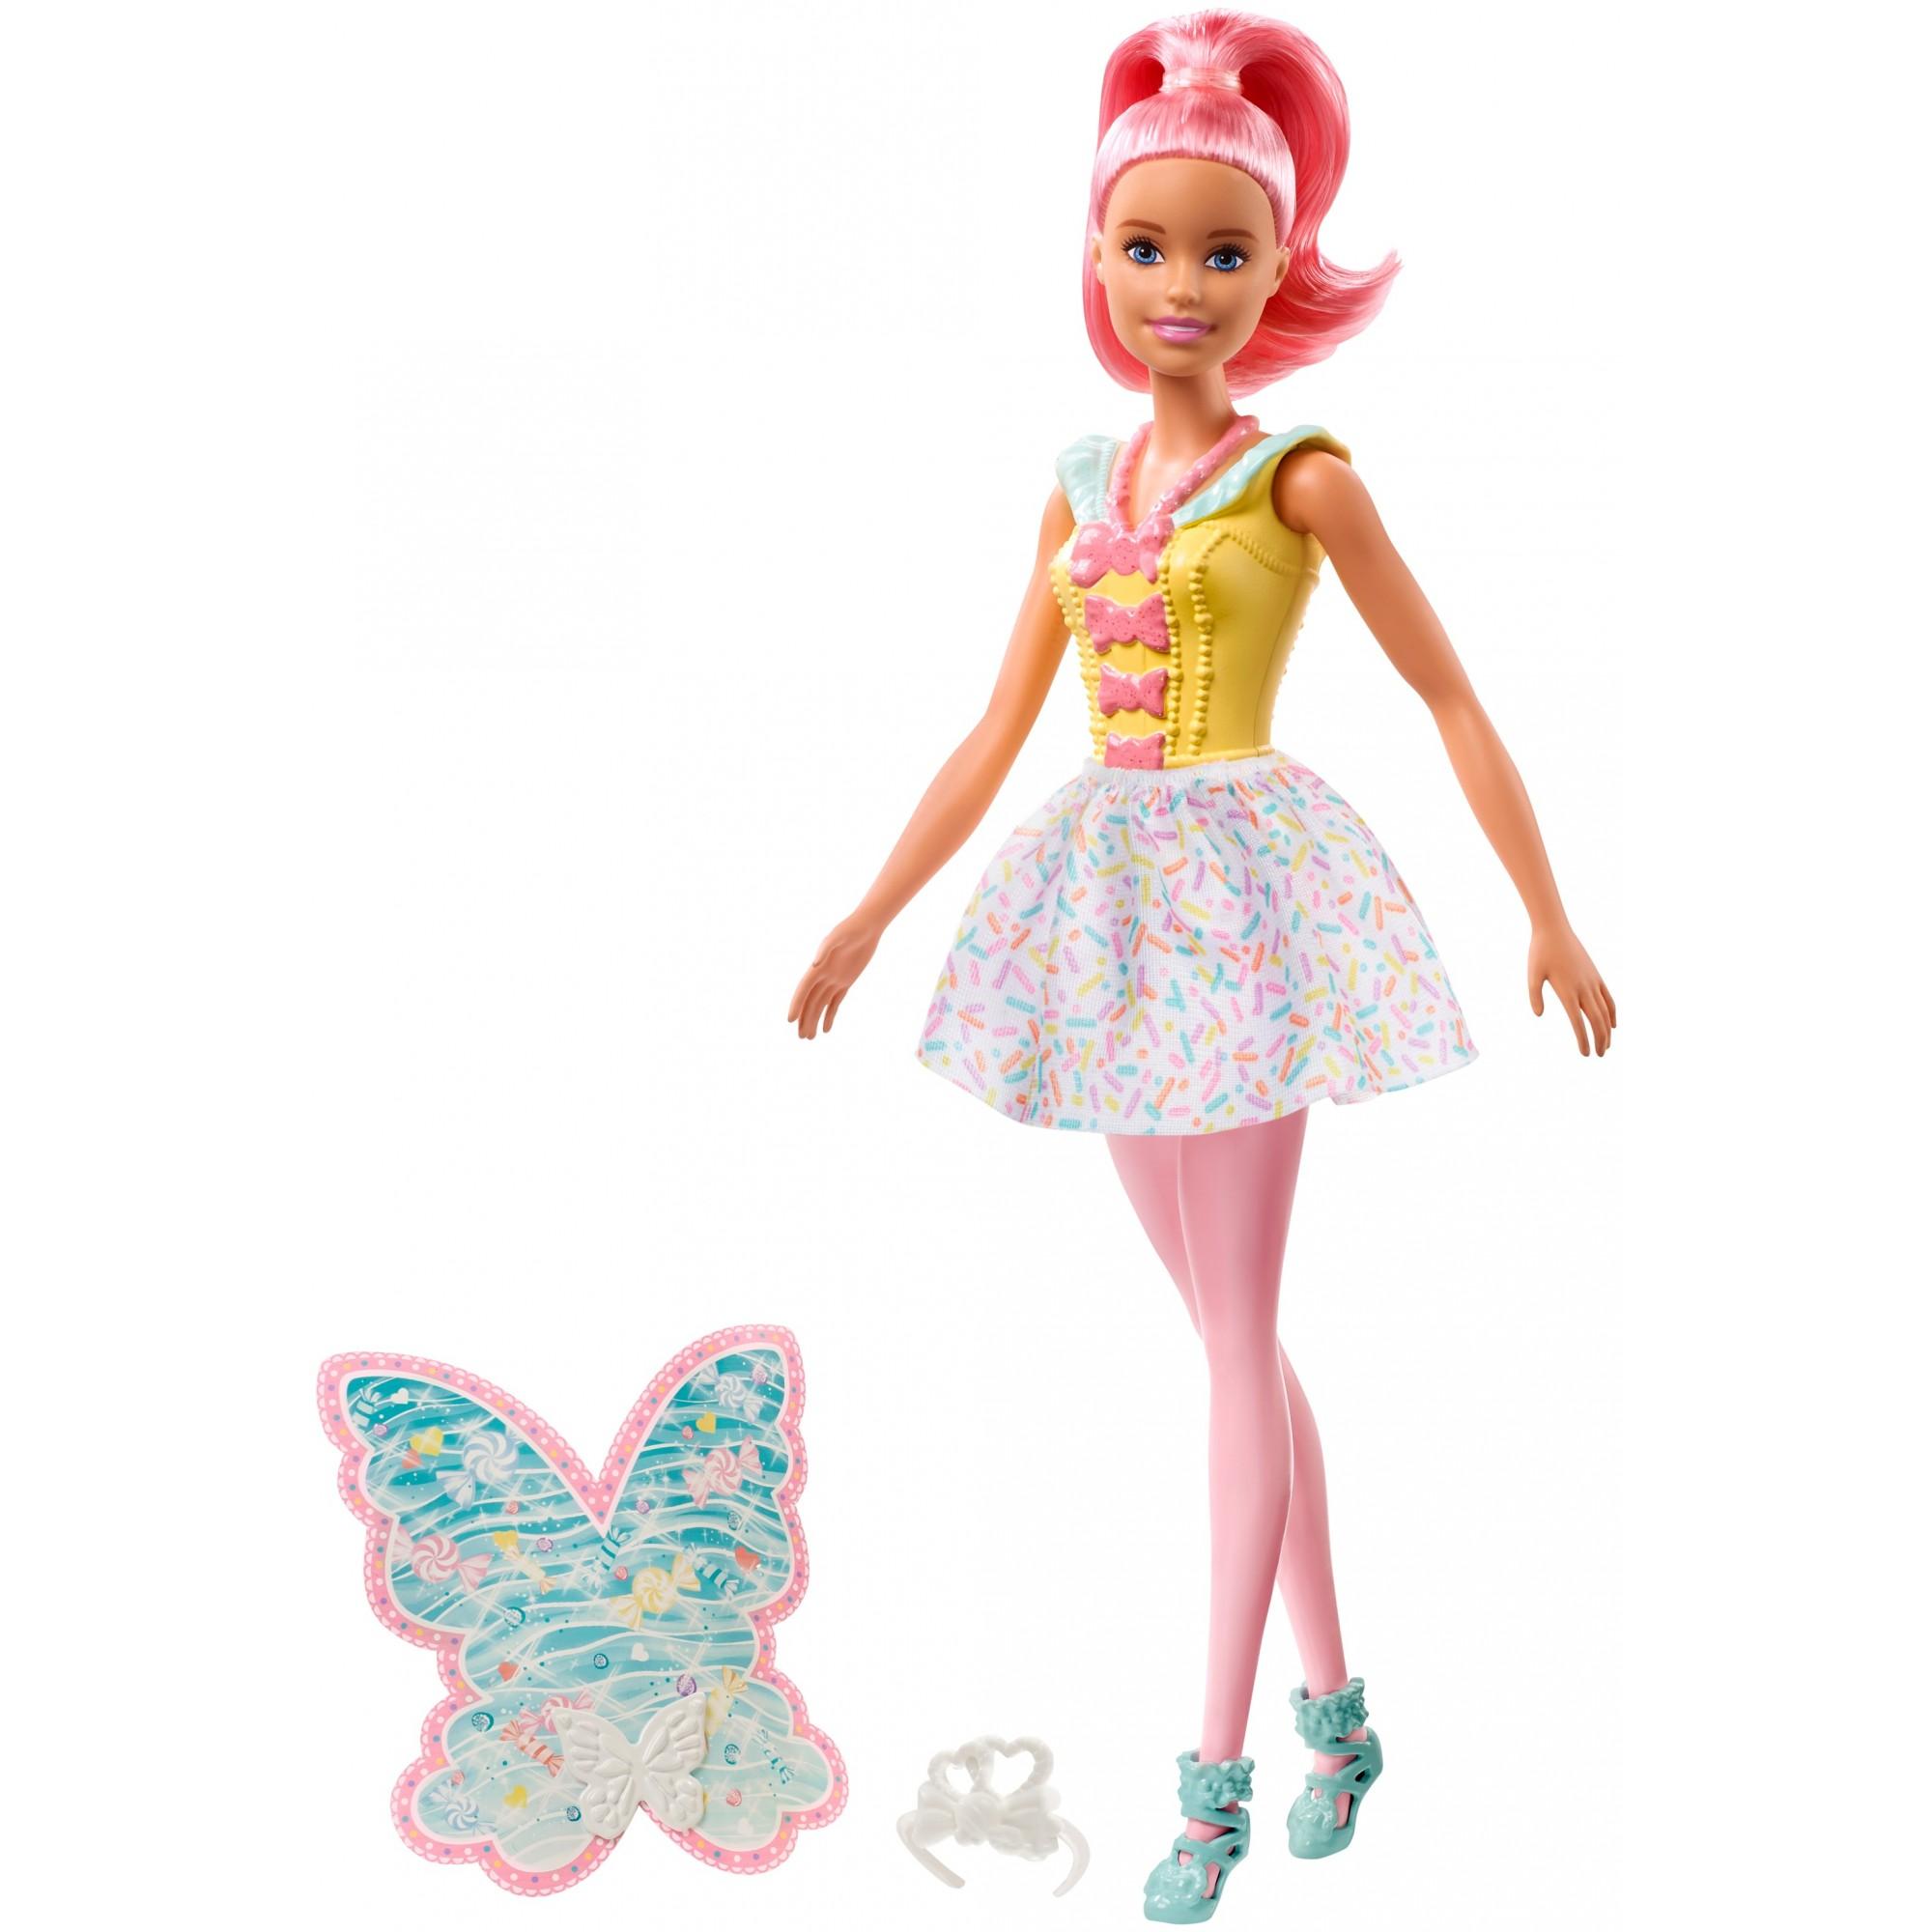 Barbie Dreamtopia Fairy Doll, Pink Hair & Candy-Decorated Wings - image 3 of 8